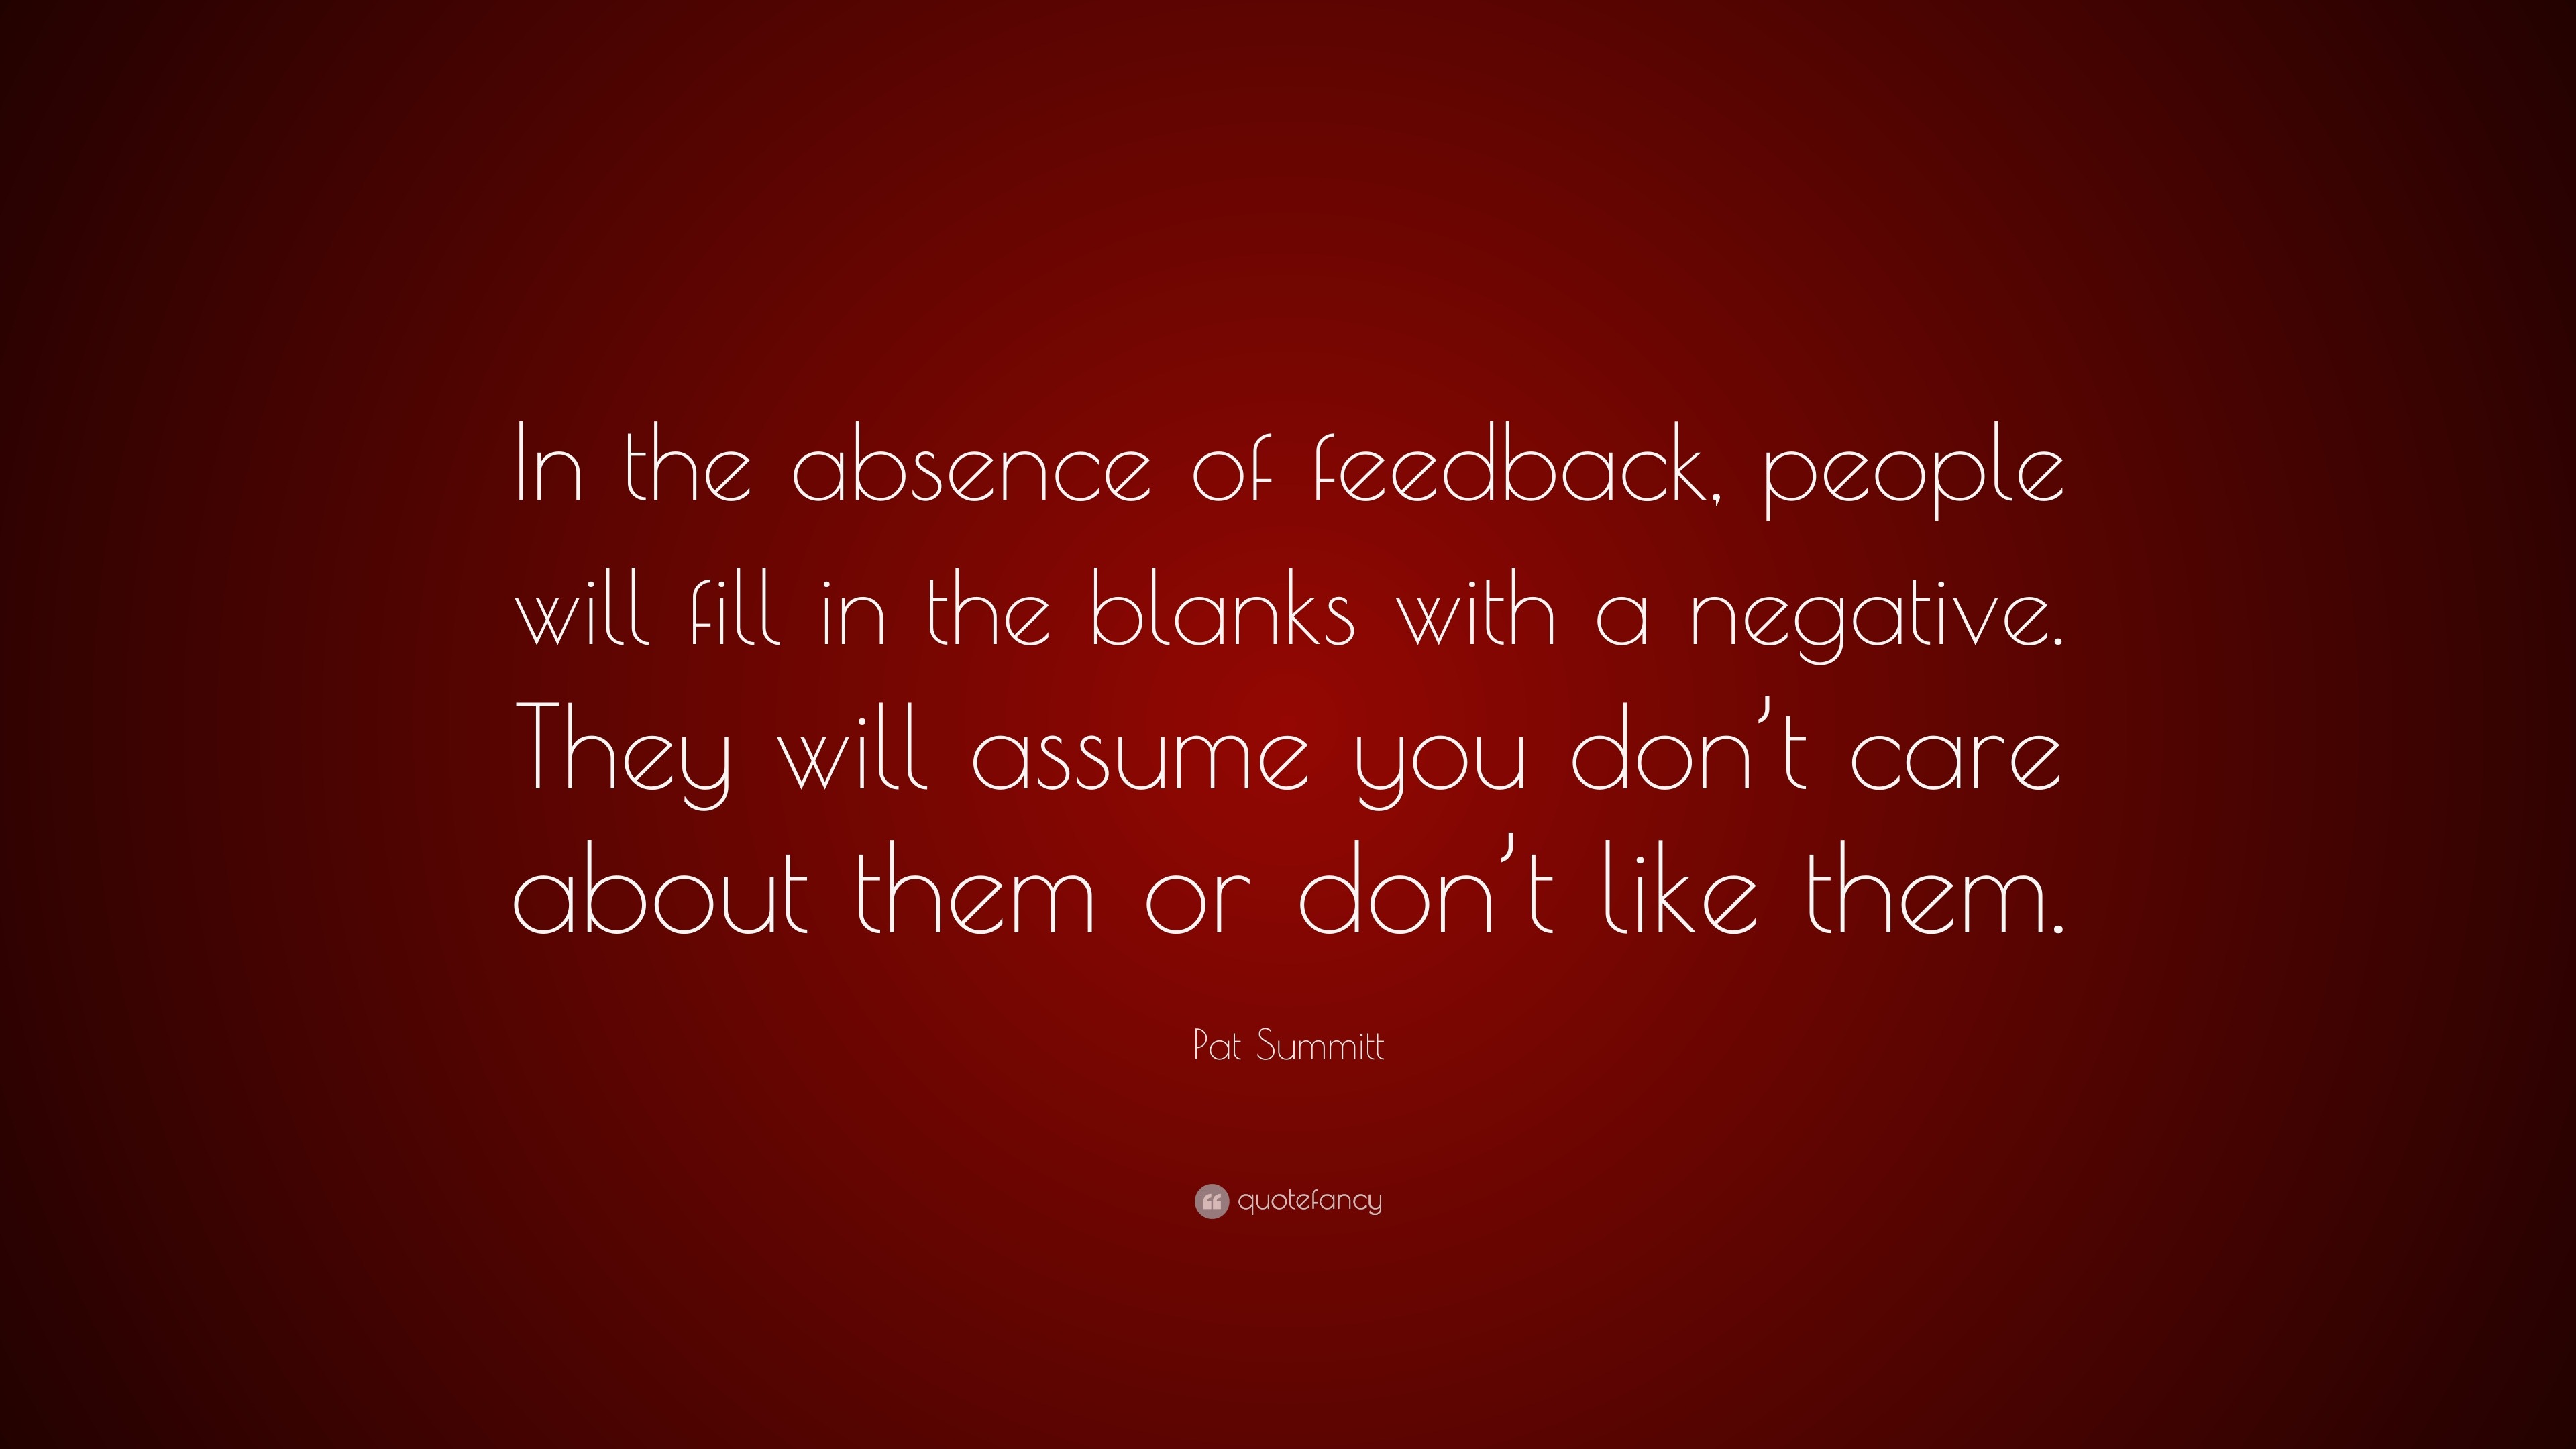 Pat Summitt Quote: “In the absence of feedback, people will fill in the ...